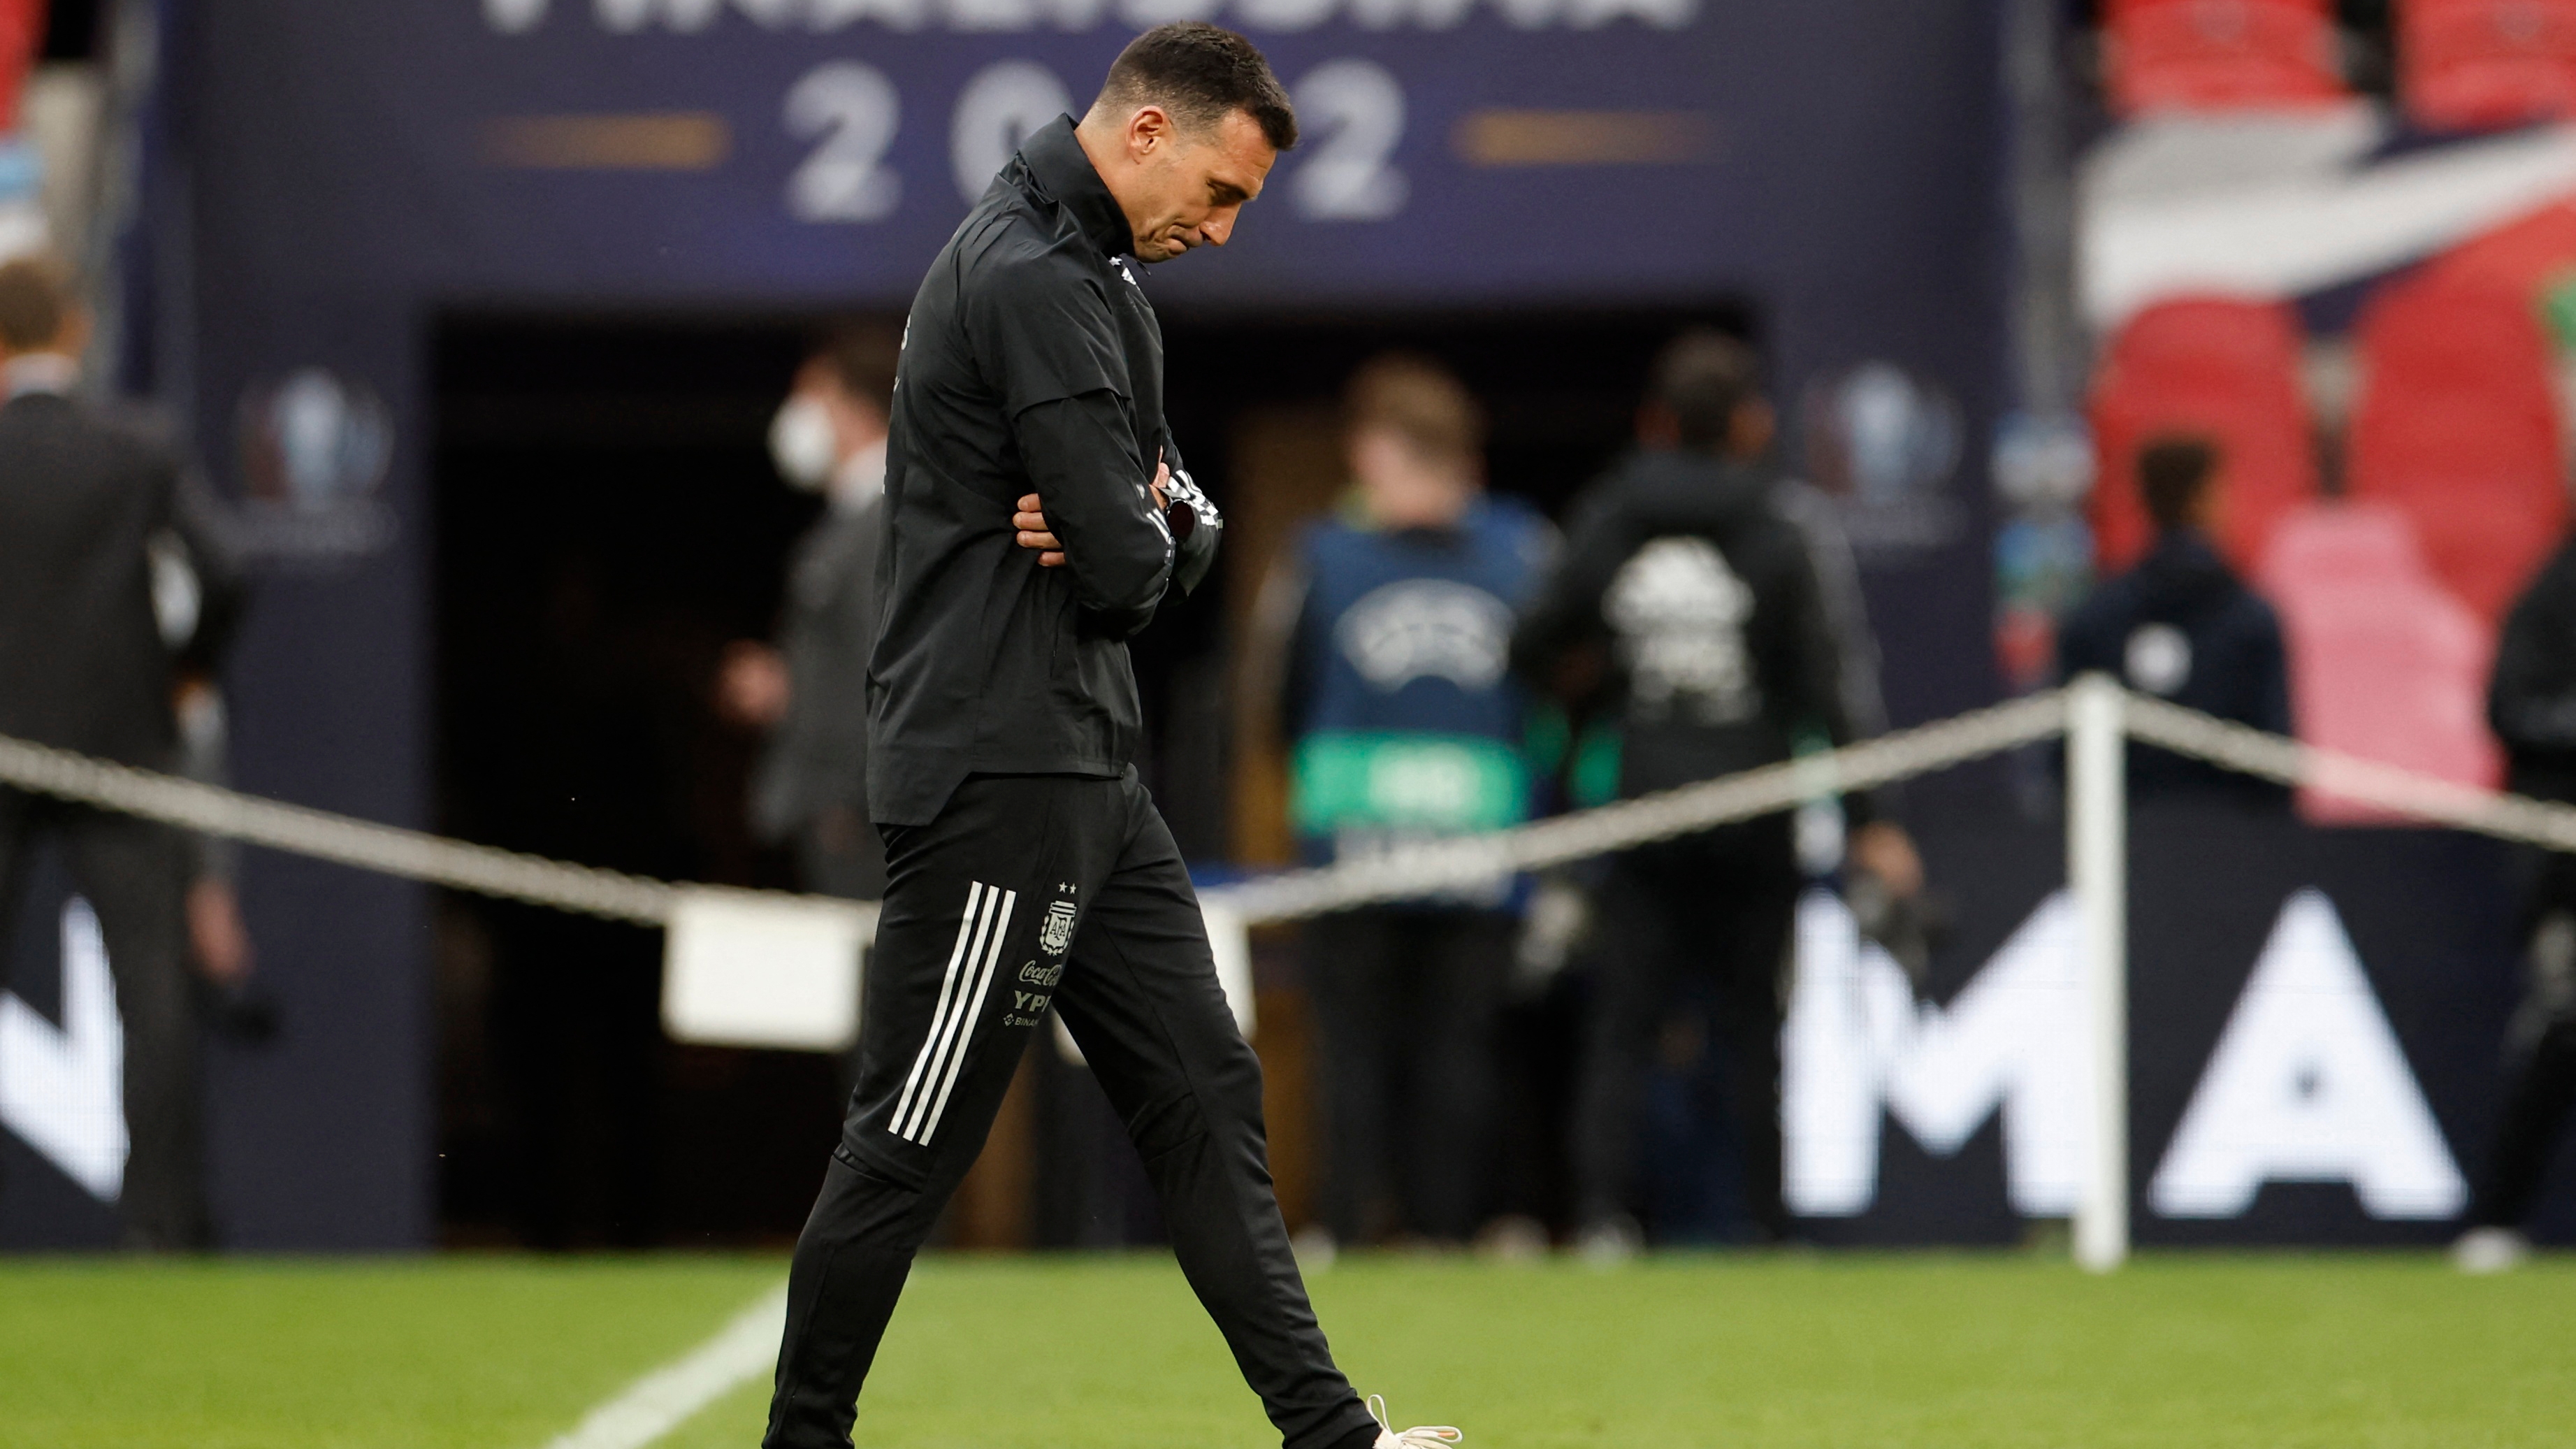 Soccer Football - Finalissima - Argentina - Training - Wembley Stadium, London, Britain - May 31, 2022 Argentina coach Lionel Scaloni during training Action Images via Reuters/Peter Cziborra